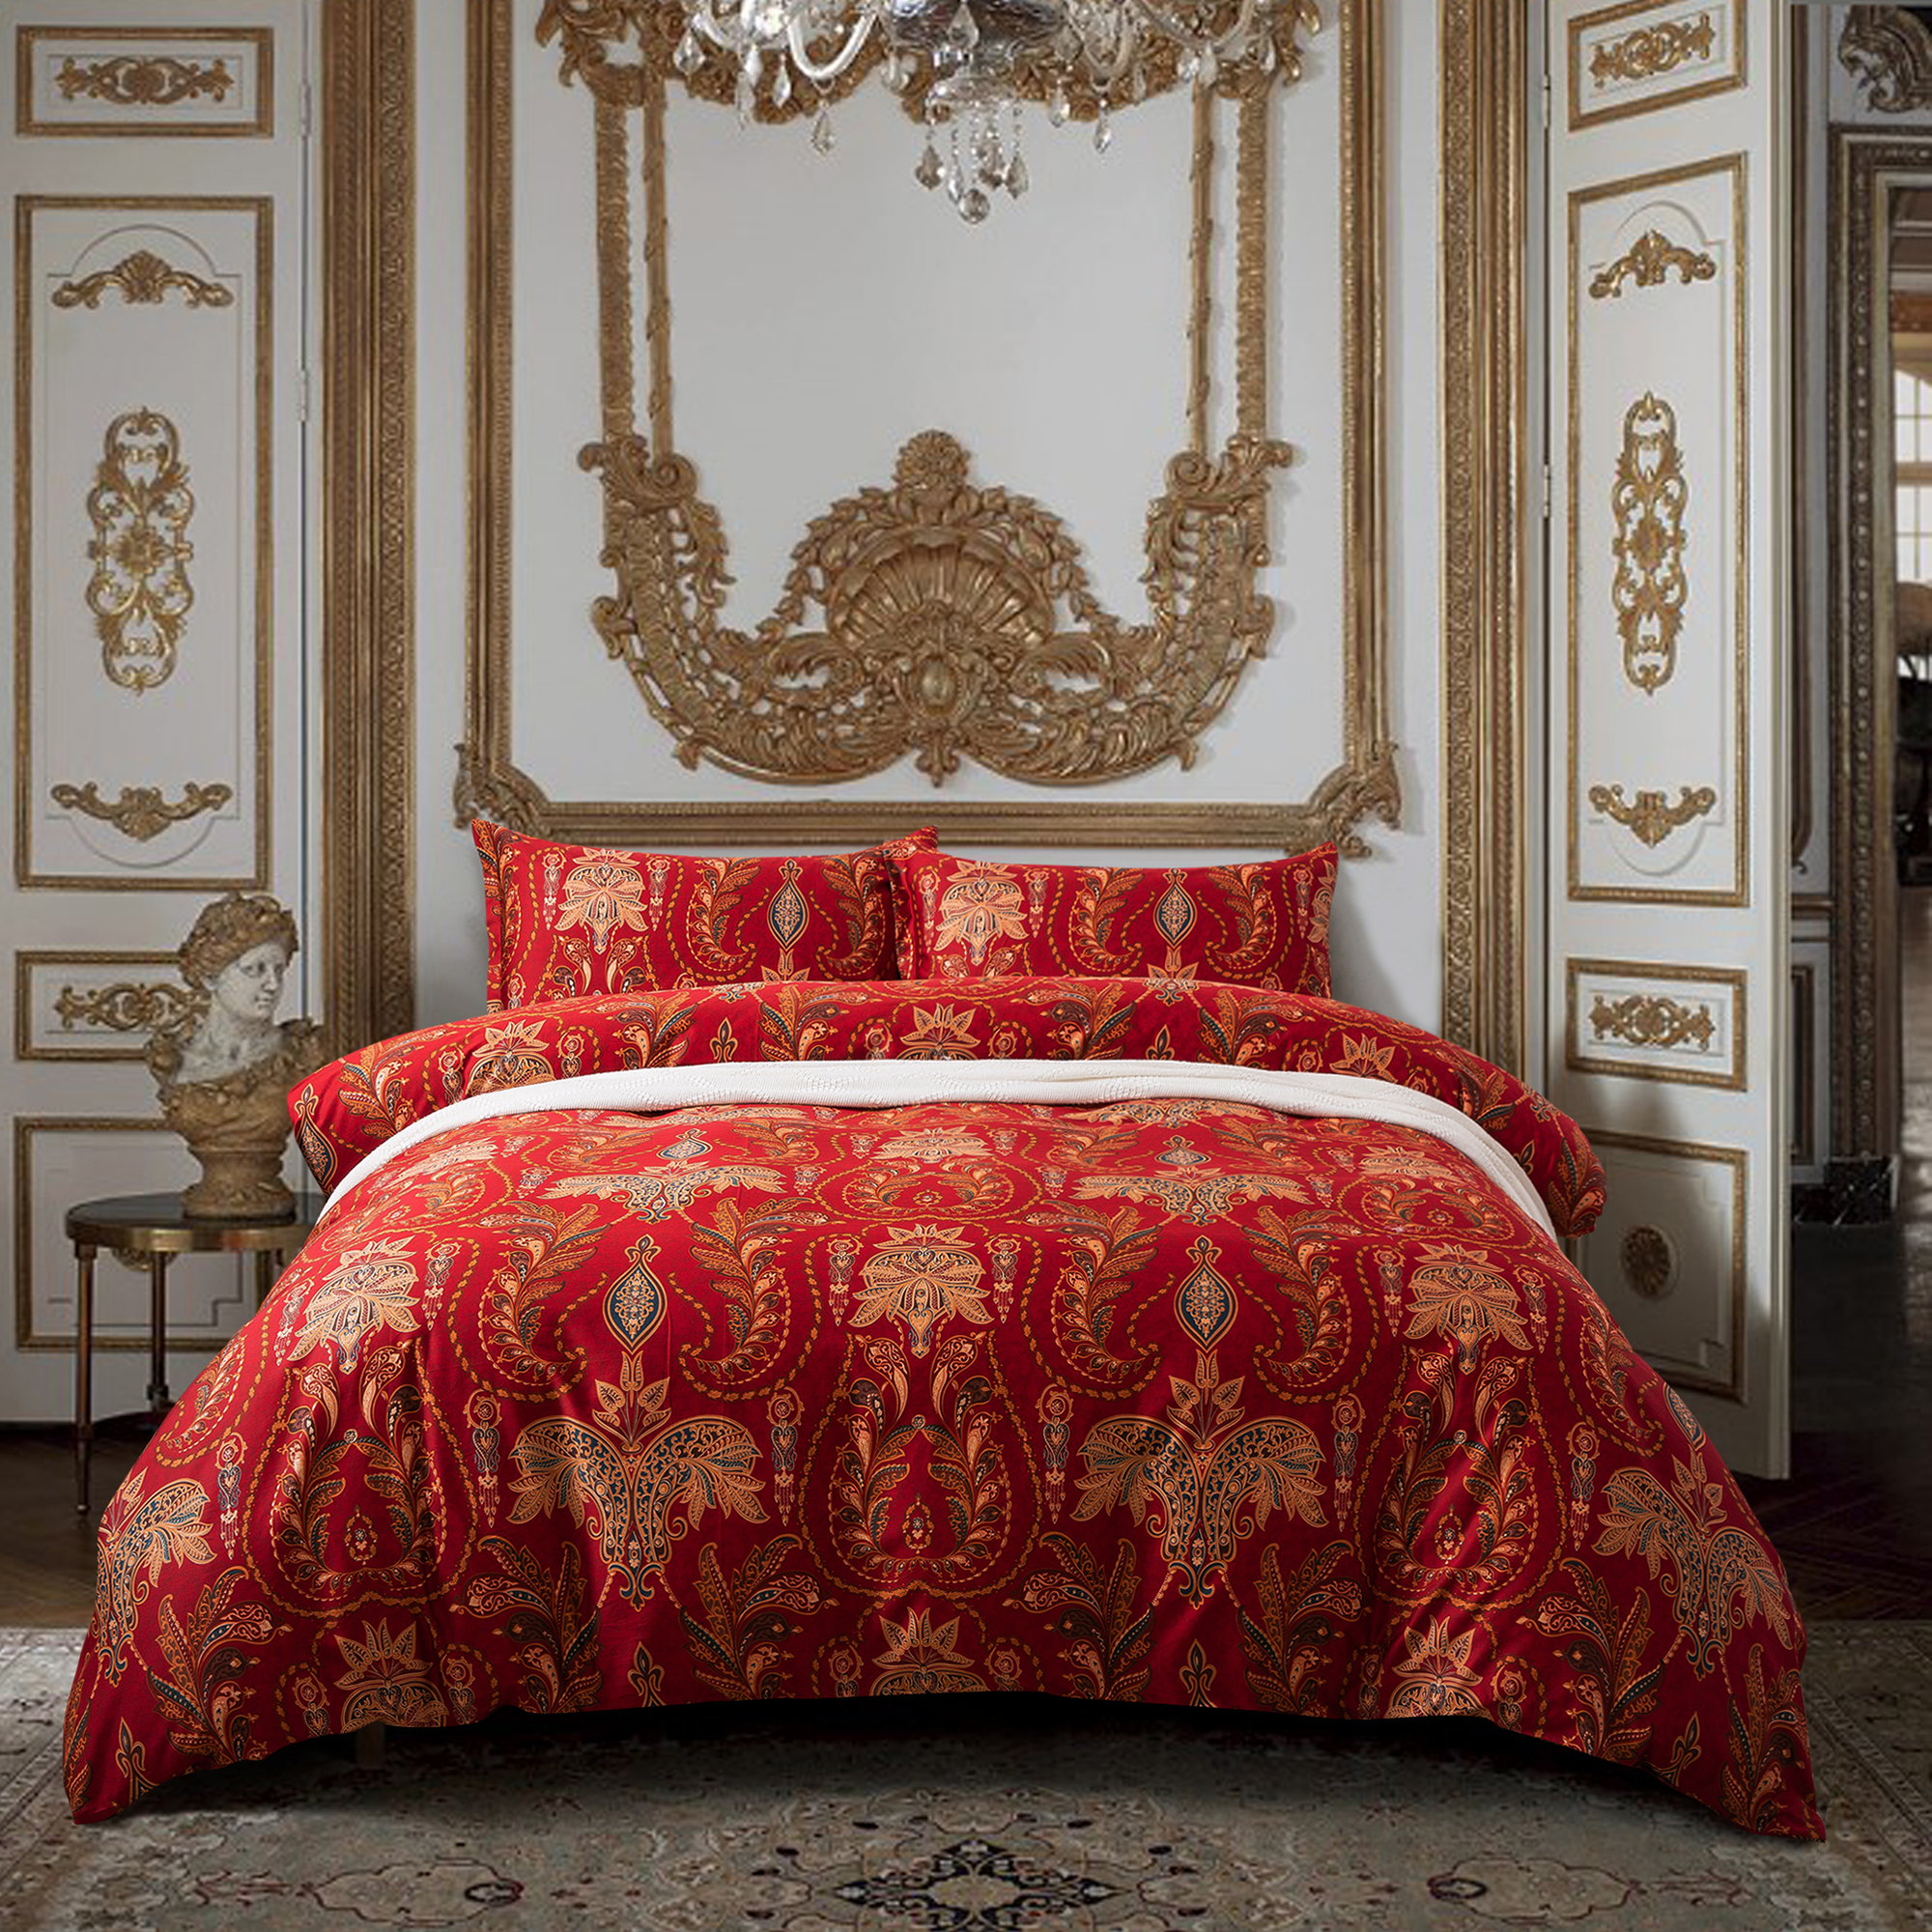 Italian Paisley Style Bedding 400tc, Red Paisley Duvet Cover Queen